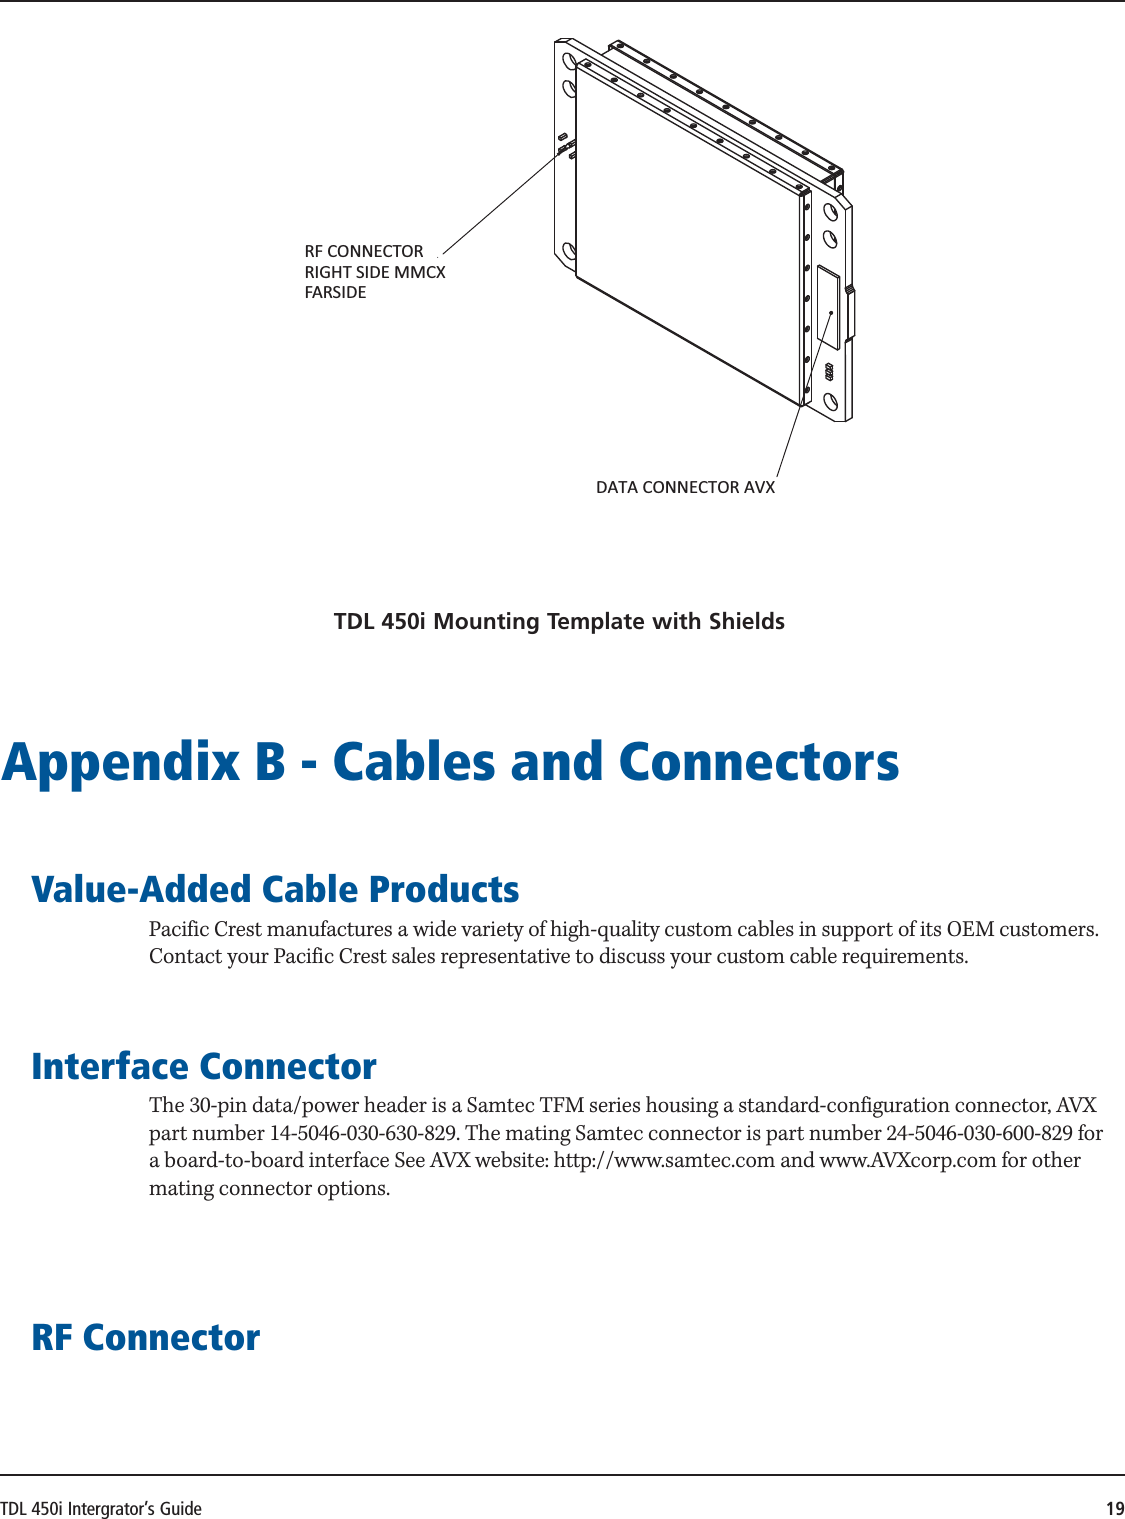 TDL 450i Intergrator’s Guide 19RF CONNECTORRIGHT SIDE MMCXFARSIDEDATA CONNECTOR AVXTDL 450i Mounting Template with ShieldsAppendix B - Cables and ConnectorsValue-Added Cable ProductsPacific Crest manufactures a wide variety of high-quality custom cables in support of its OEM customers.  Contact your Pacific Crest sales representative to discuss your custom cable requirements.Interface ConnectorThe 30-pin data/power header is a Samtec TFM series housing a standard-configuration connector, AVX part number 14-5046-030-630-829. The mating Samtec connector is part number 24-5046-030-600-829 for a board-to-board interface See AVX website: http://www.samtec.com and www.AVXcorp.com for other mating connector options.RF Connector